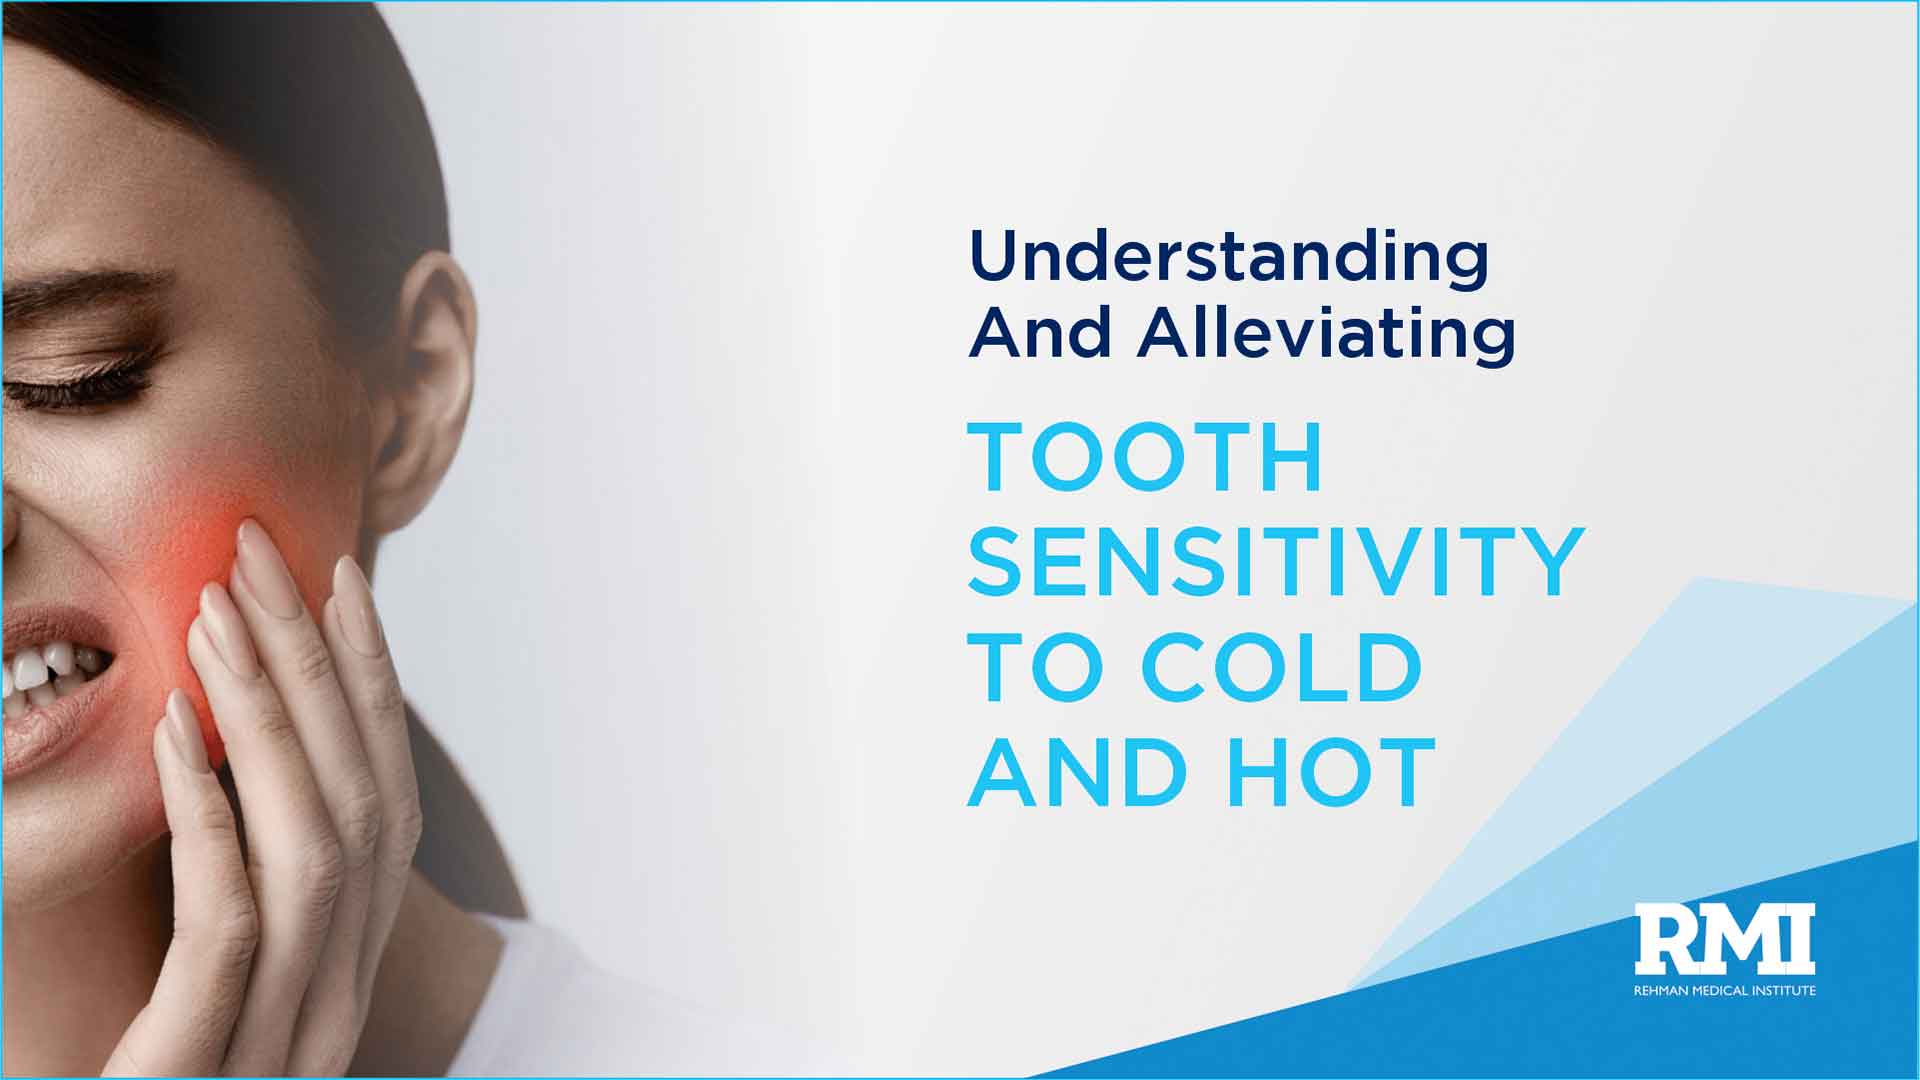 Understanding and Alleviating Tooth Sensitivity to Cold and Hot